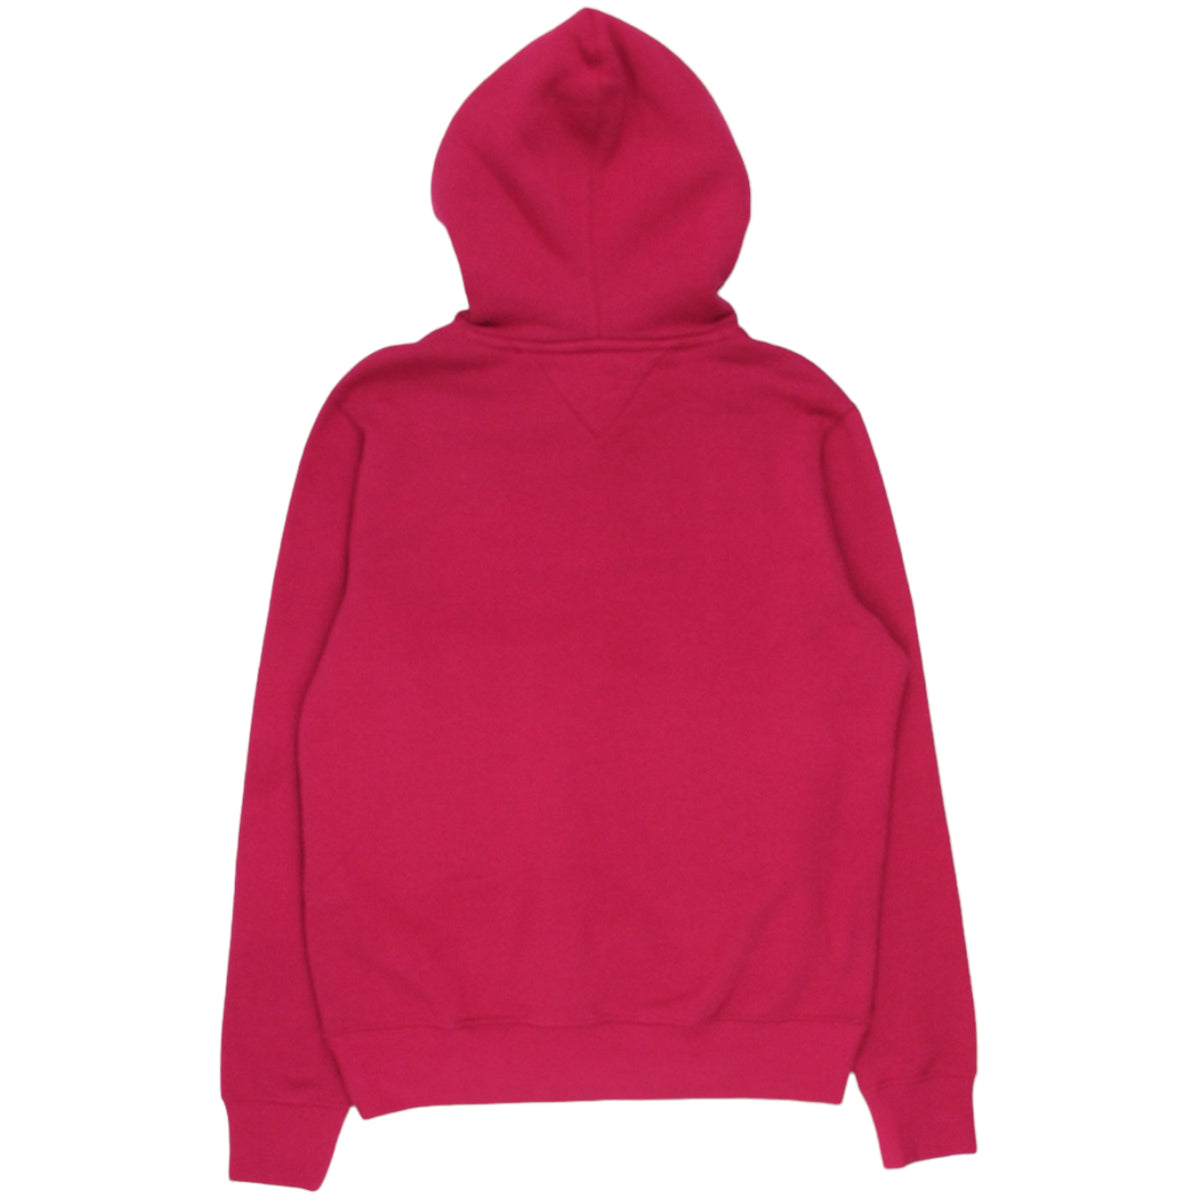 Tommy Hilfiger Berry Arched Varsity Hoody